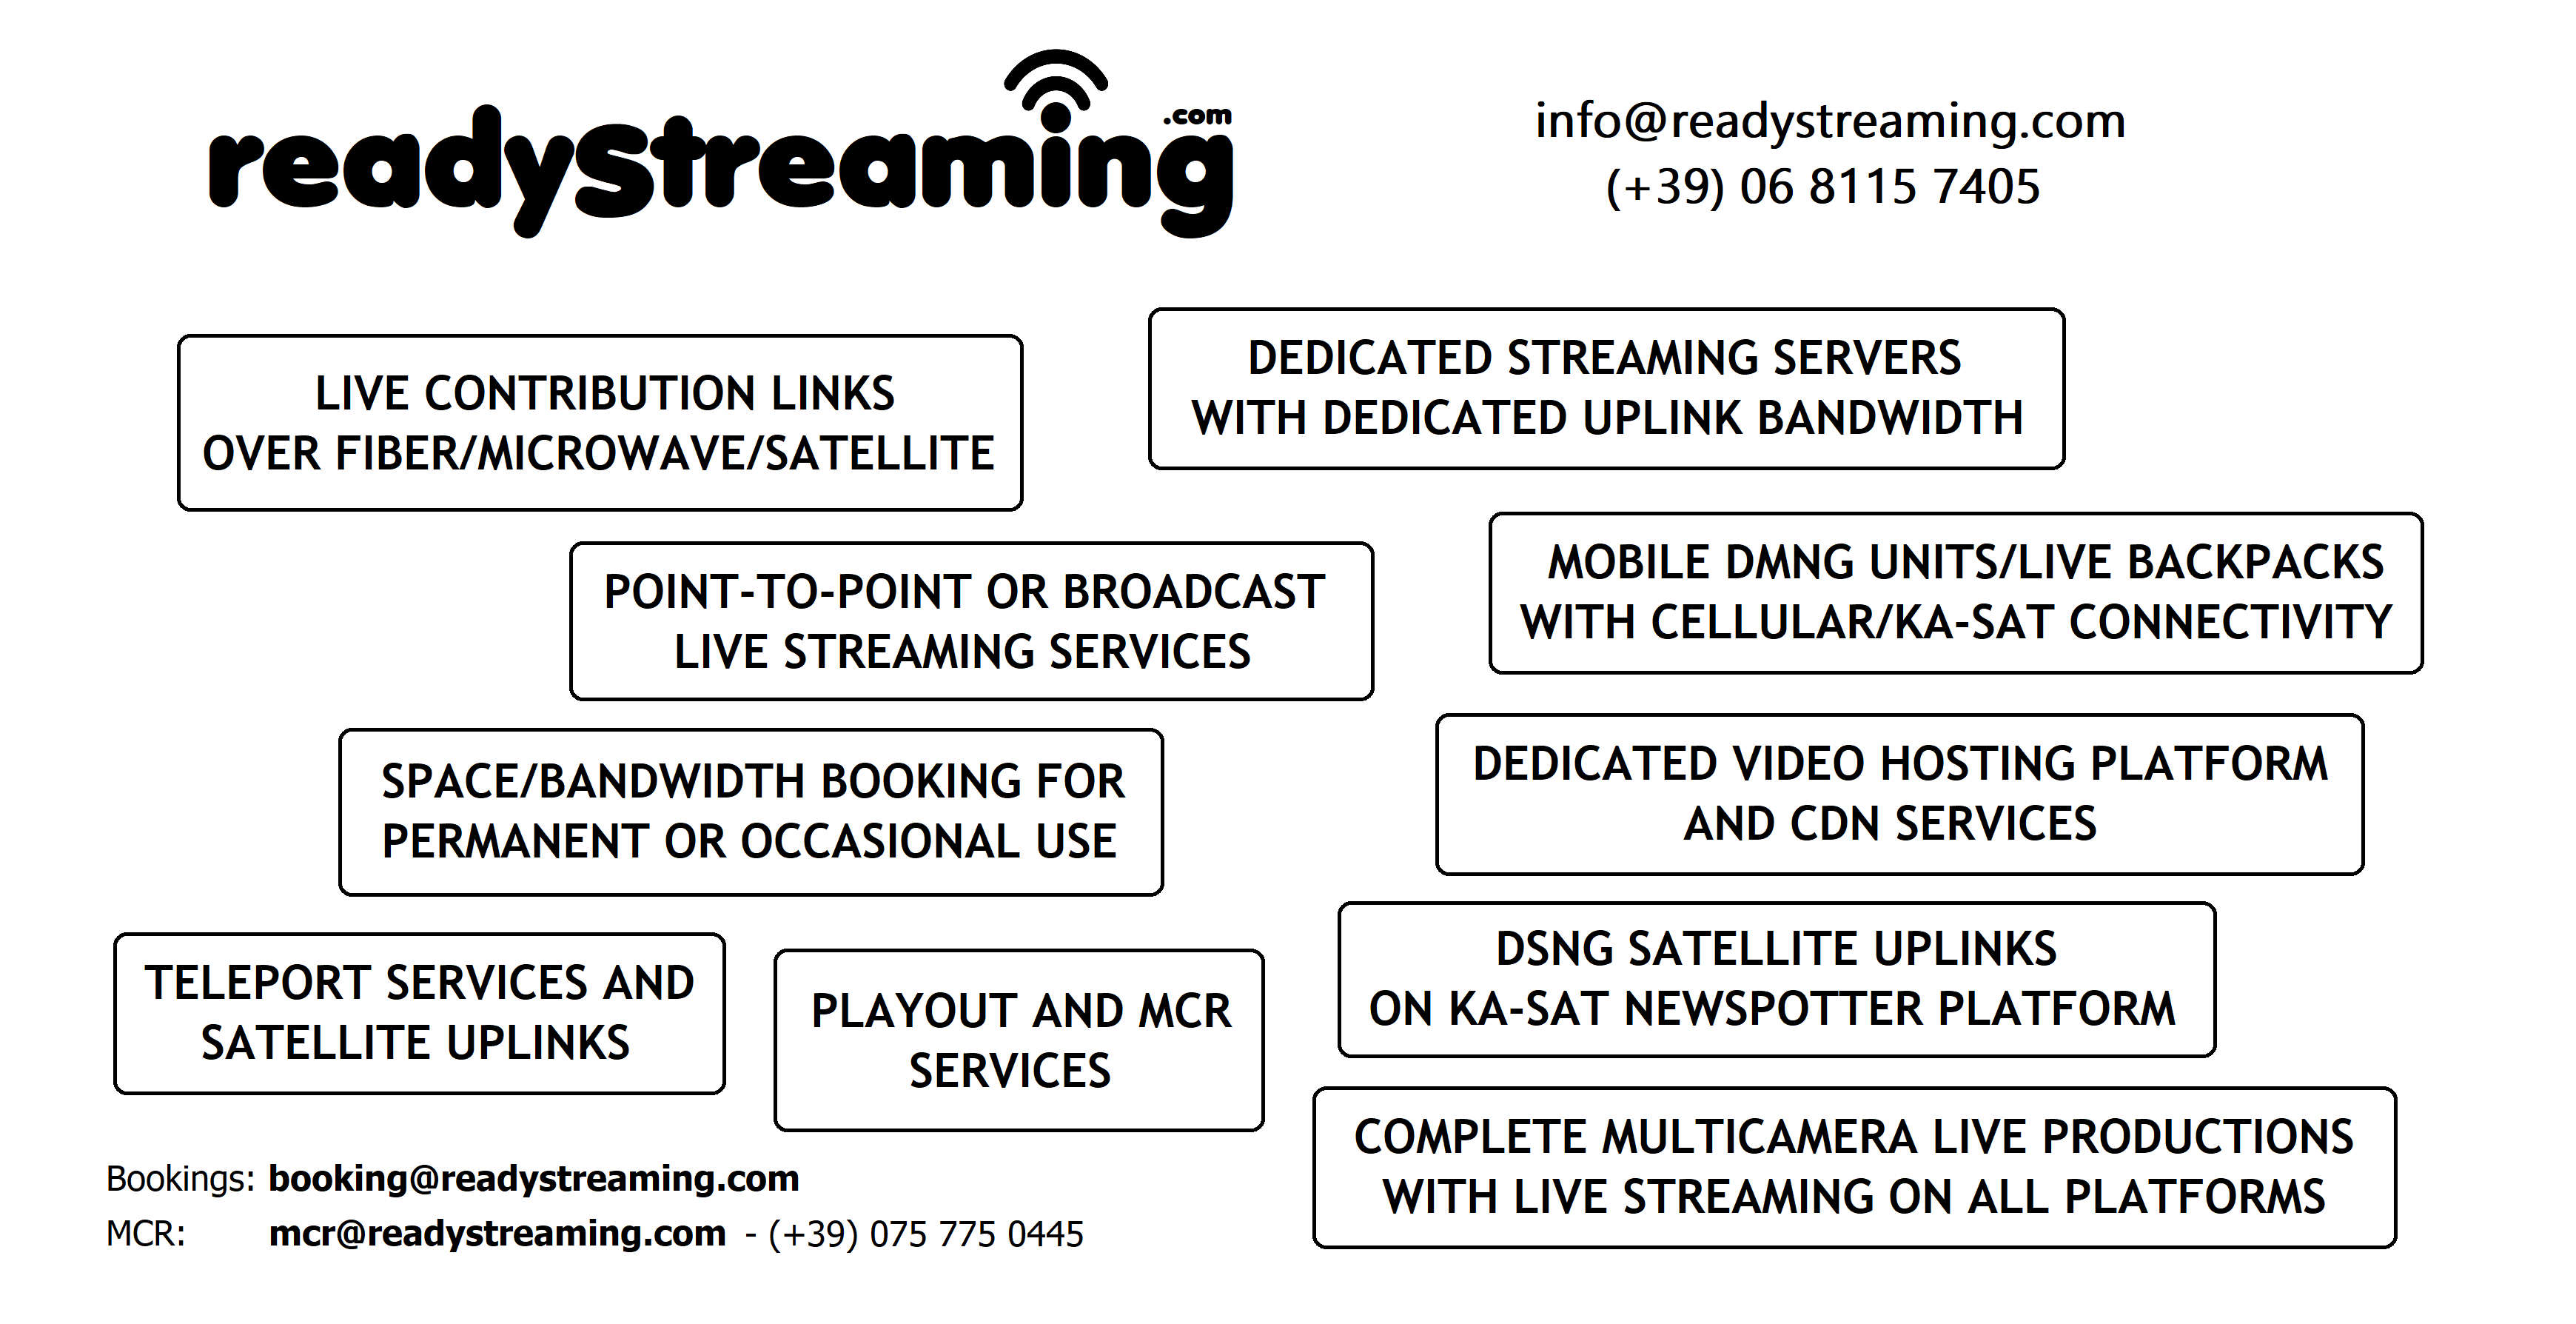 readystreaming.com - info@readystreaming.com - (+39) 06 8115 7405 - LIVE CONTRIBUTION LINKS OVER FIBER/MICROWAVE/SATELLITE - DEDICATED STREAMING SERVERS WITH DEDICATED UPLINK BANDWIDTH - POINT-TO-POINT OR BROADCAST LIVE STREAMING SERVICES - MOBILE DMNG UNITS/LIVE BACKPACKS WITH CELLULAR/KA-SAT CONNECTIVITY - SPACE/BANDWIDTH BOOKING FOR PERMANENT OR OCCASIONAL USE - DEDICATED VIDEO HOSTING PLATFORM AND CDN SERVICES - TELEPORT SERVICES AND SATELLITE UPLINKS - DSNG SATELLITE UPLINKS ON KA-SAT NEWSPOTTER PLATFORM - COMPLETE MULTICAMERA LIVE PRODUCTIONS WITH LIVE STREAMING ON ALL PLATFORMS - PLAYOUT AND MCR SERVICES - Bookings: booking@readystreaming.com - MCR: mcr@readystreaming.com - (+39) 075 775 0445